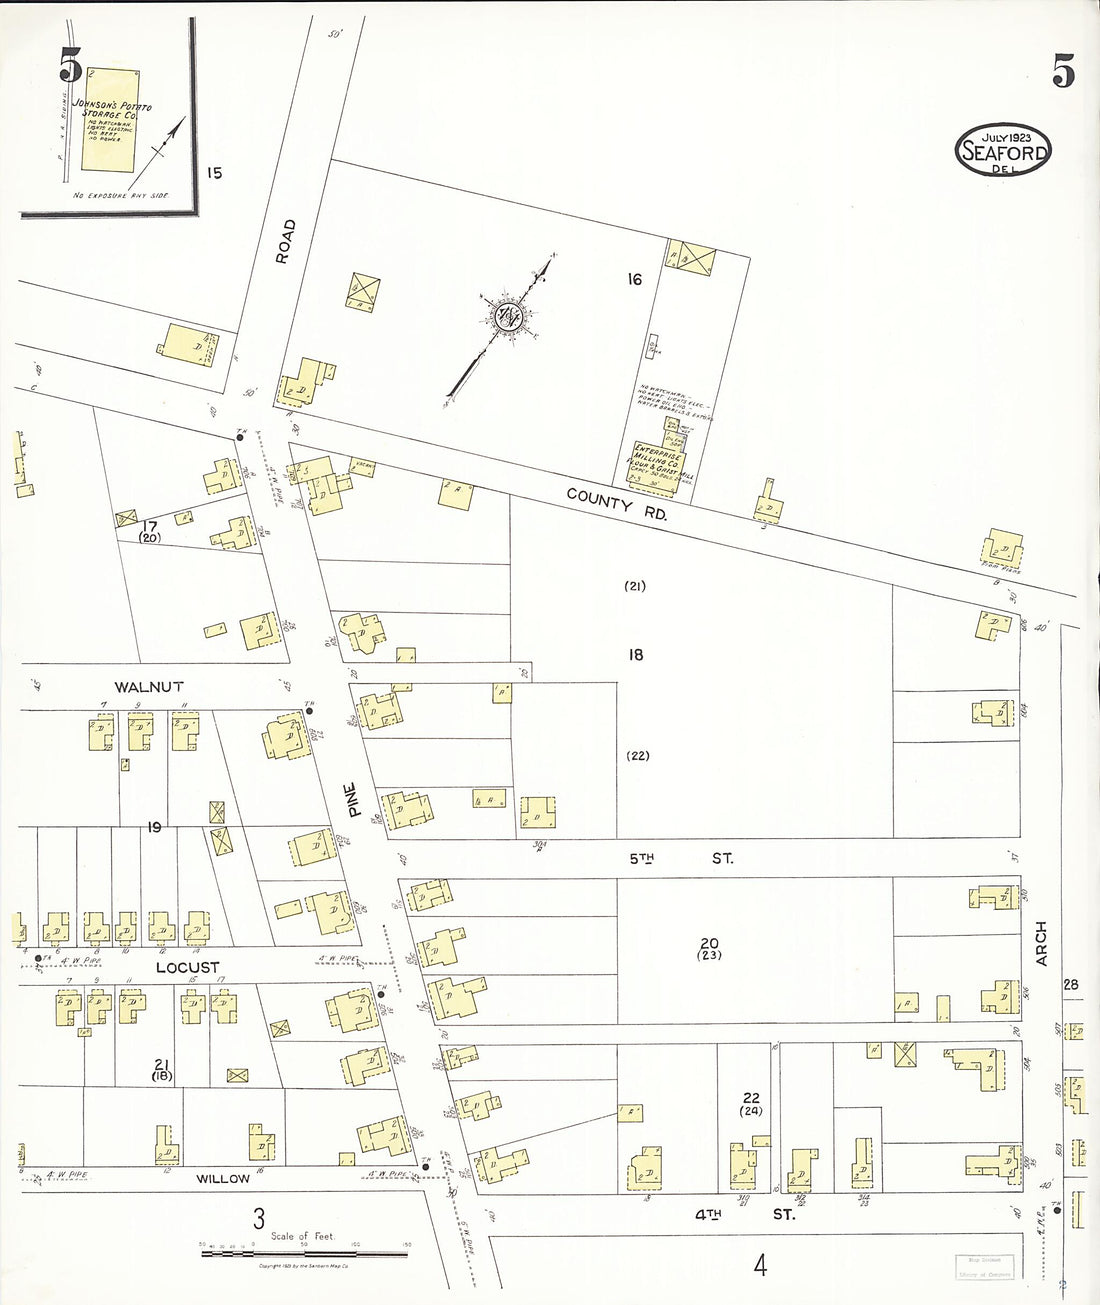 This old map of Seaford, Sussex County, Delaware was created by Sanborn Map Company in 1923